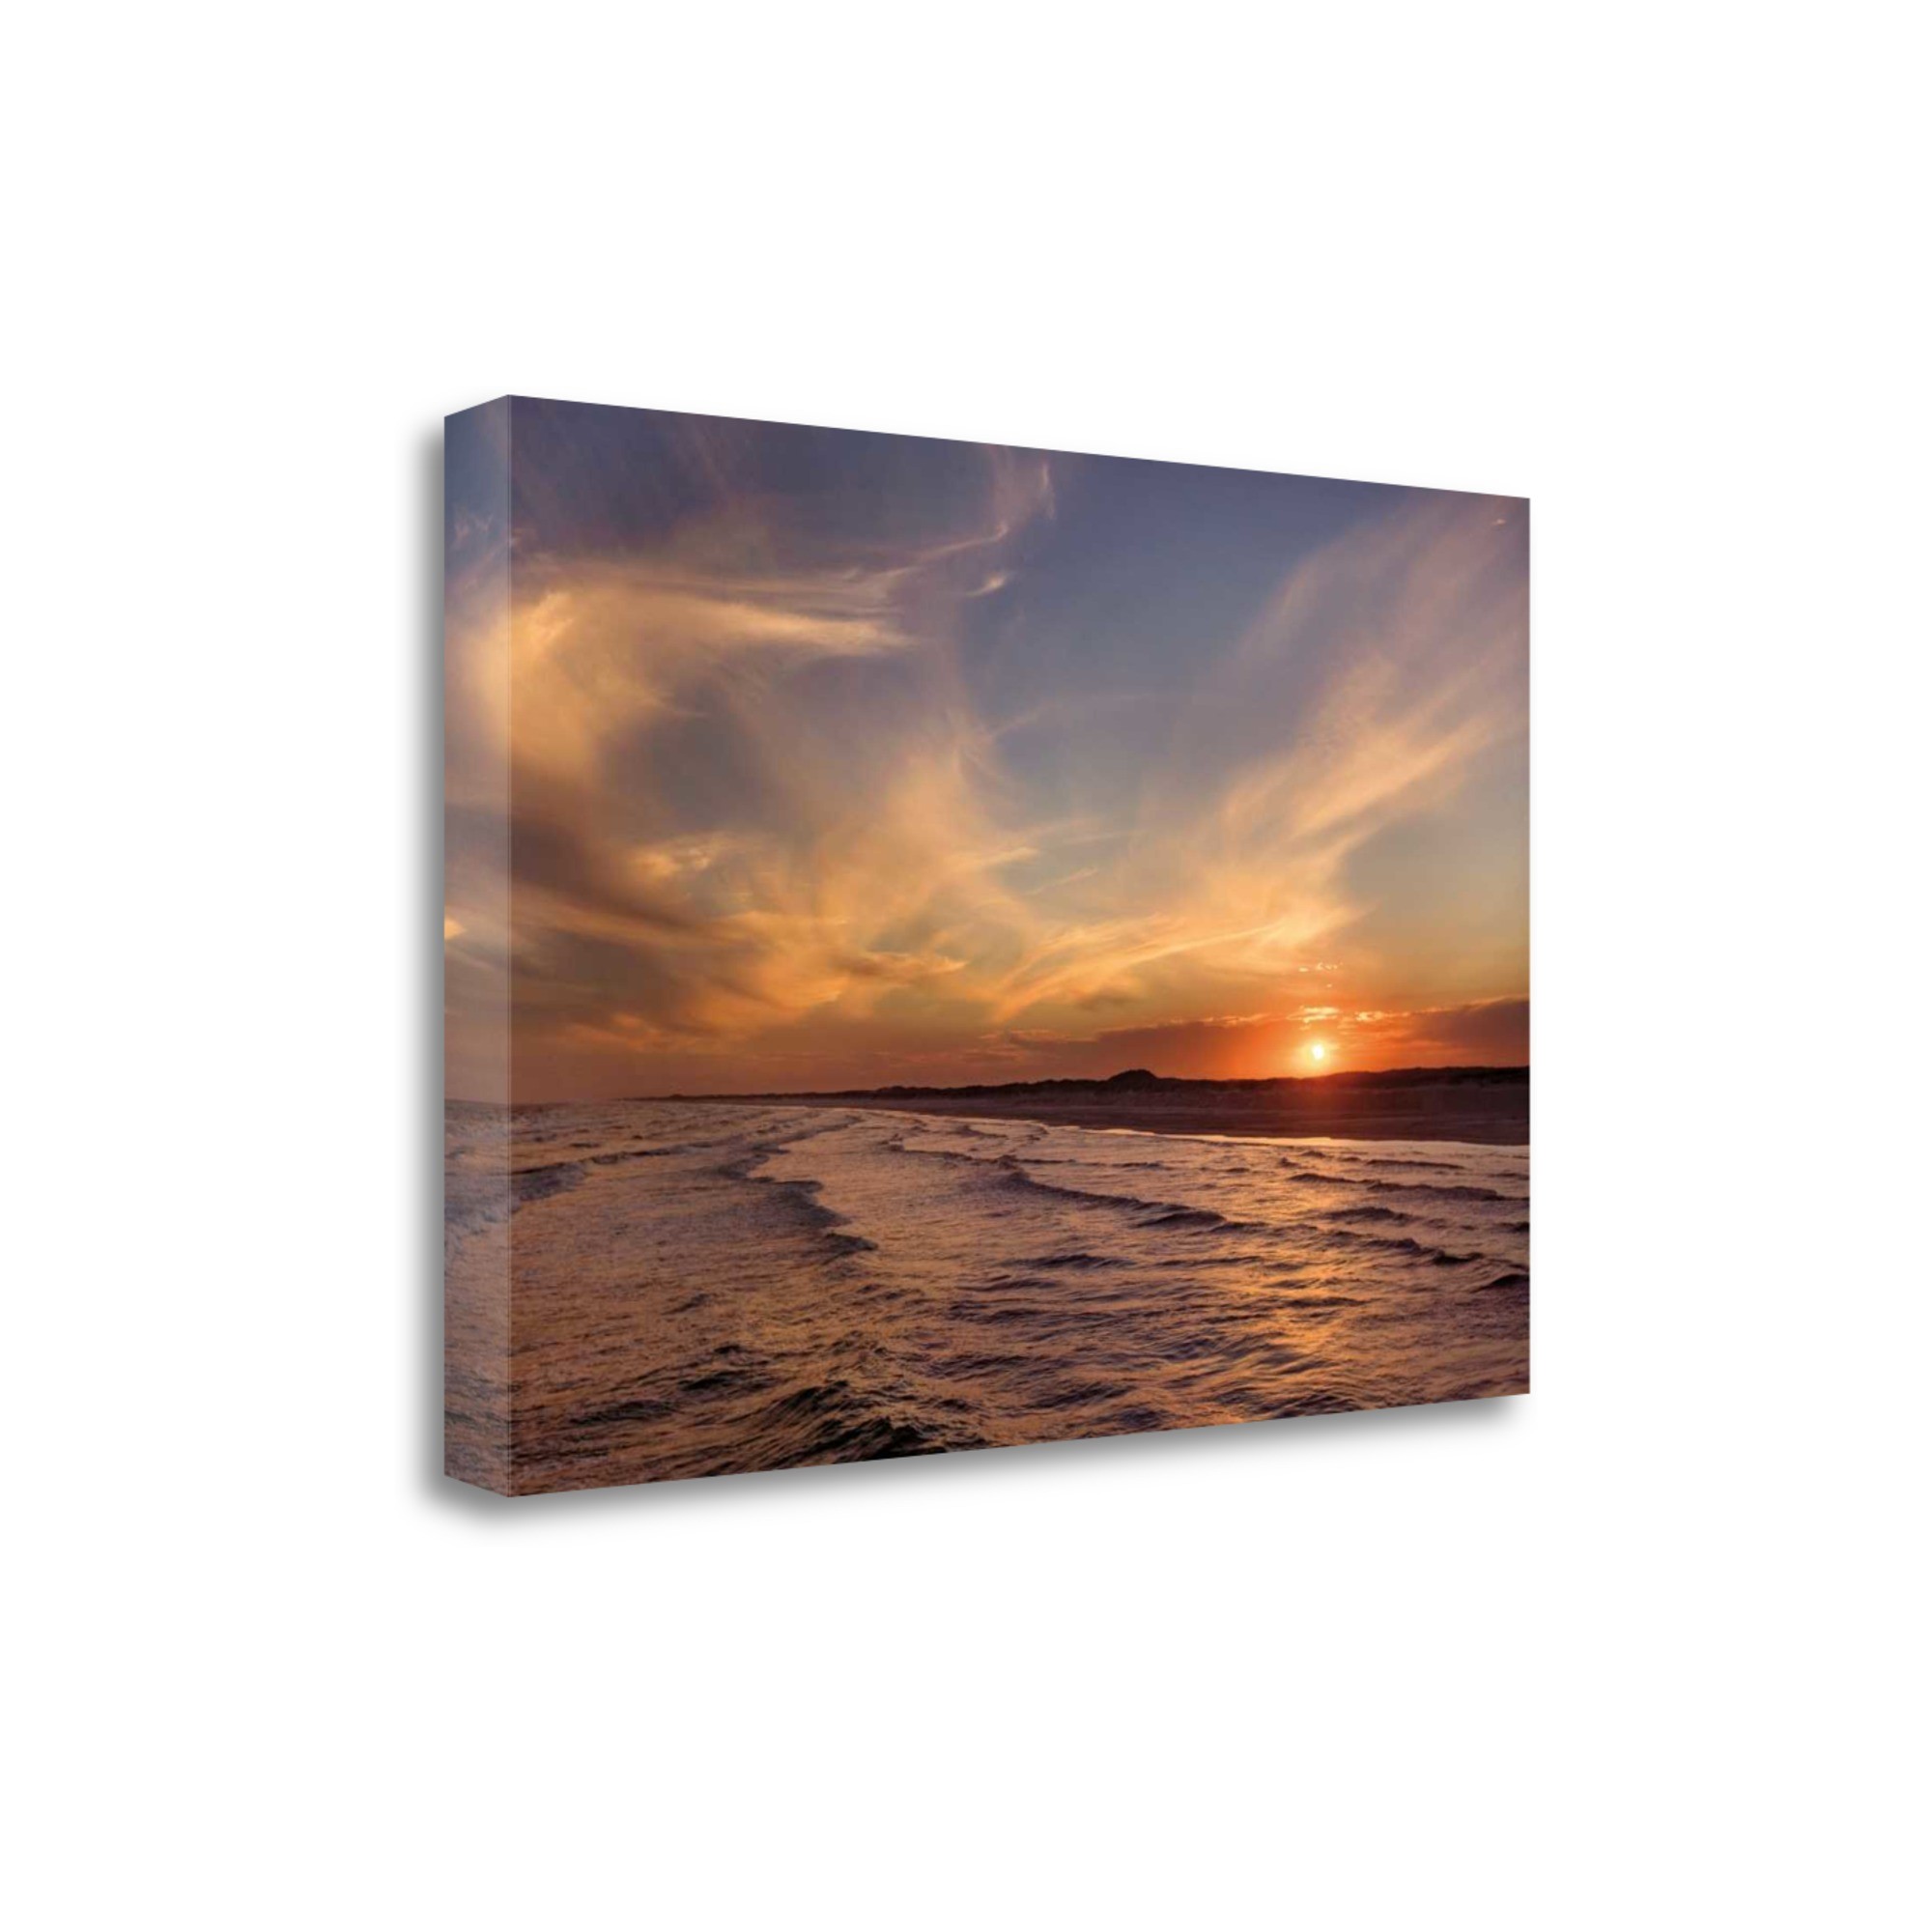 47" Orange Sunset Over The Ocean 7 Giclee Wrap Canvas Wall Art